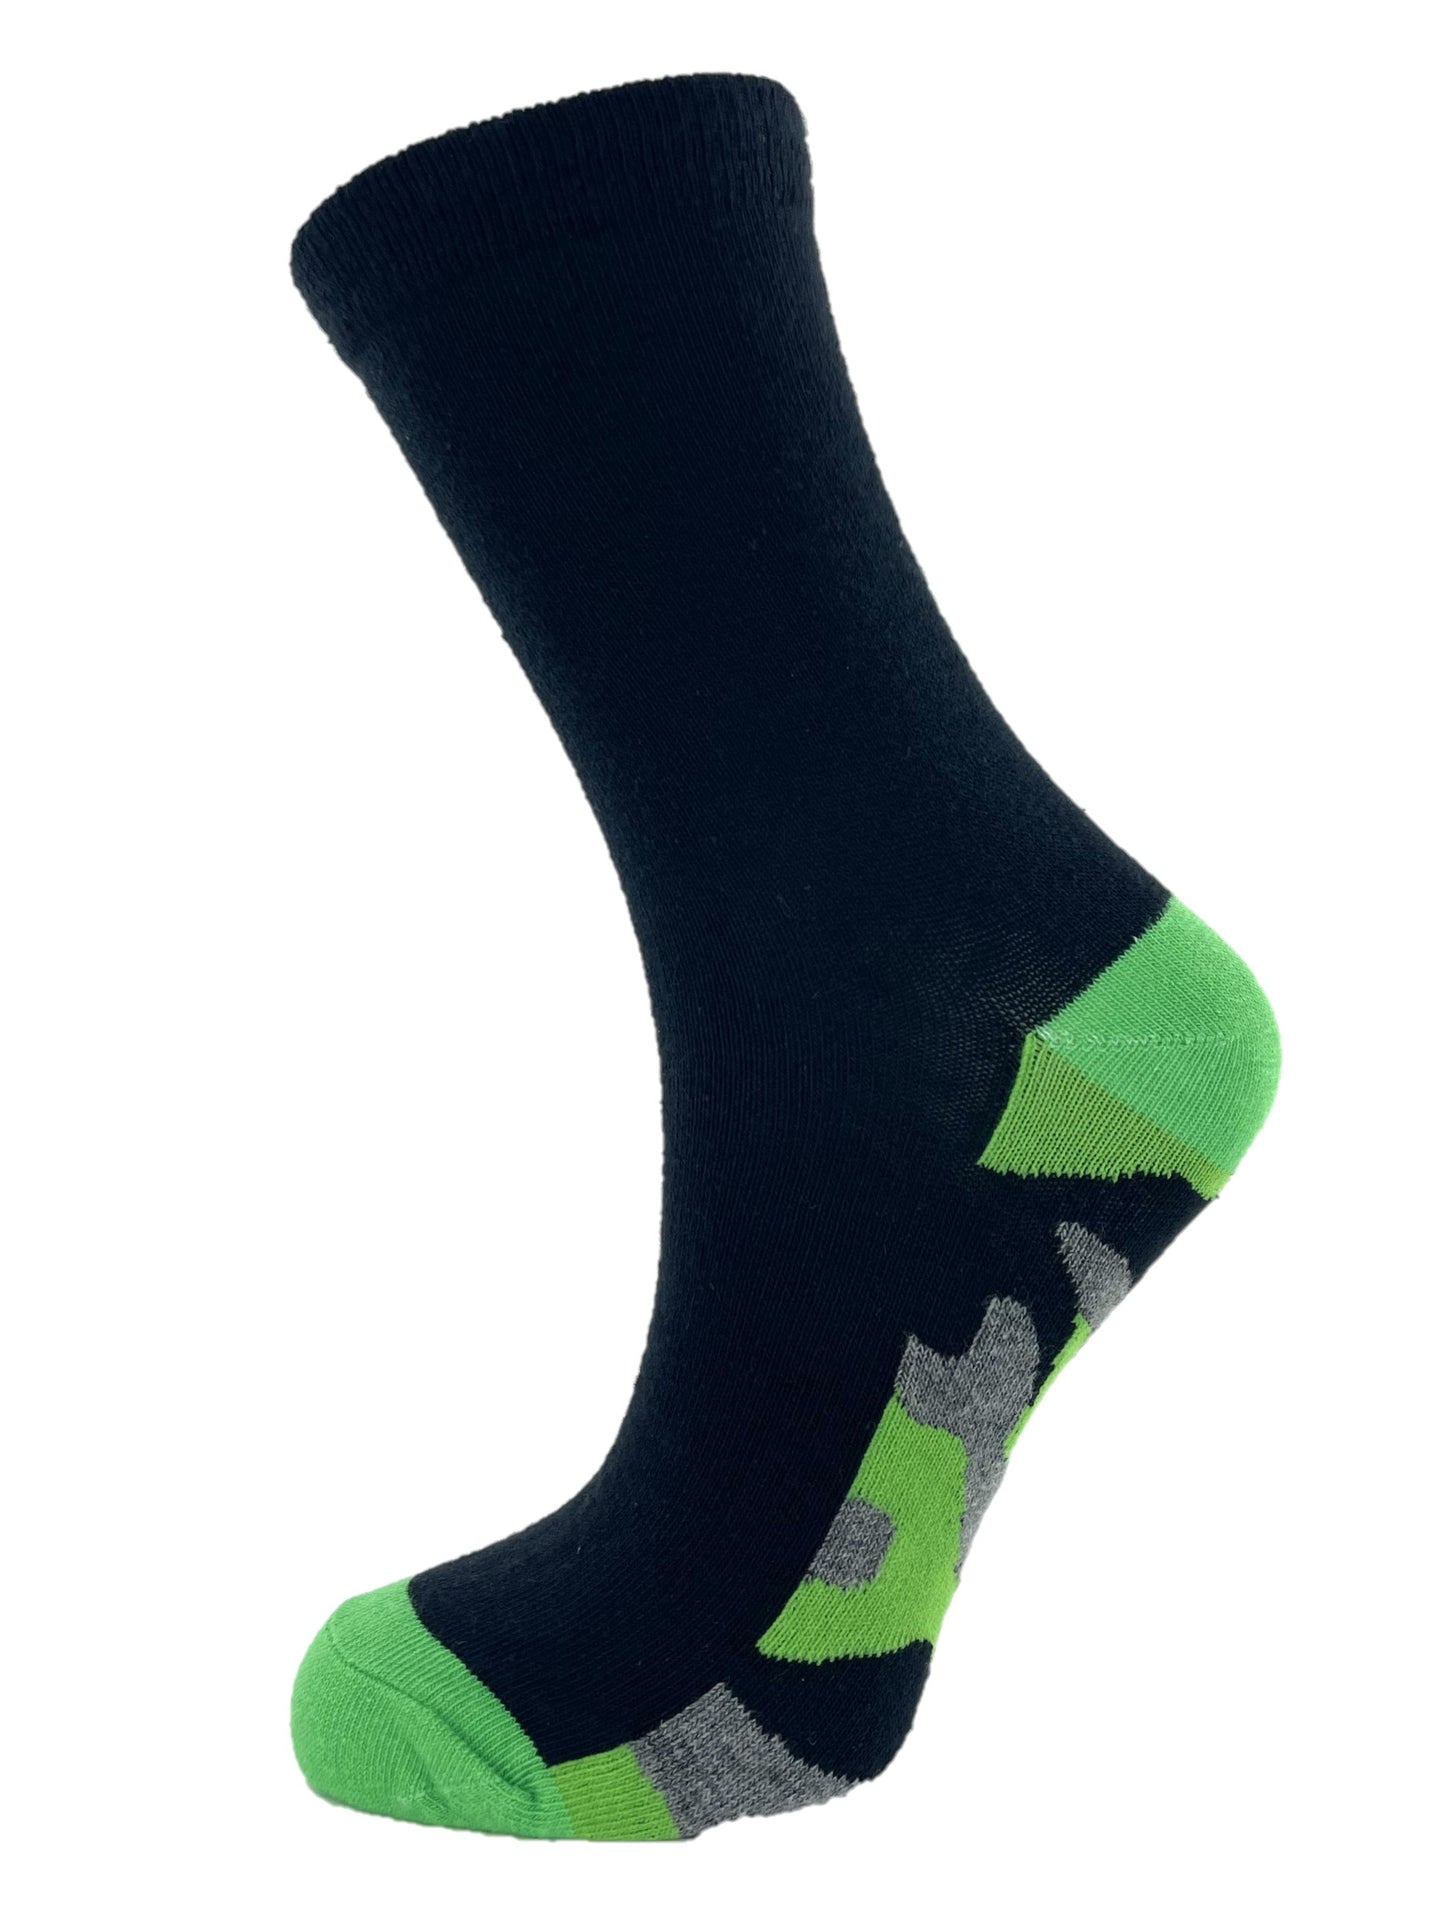 6 Pack Boys Black Socks Cotton Rich Camo Patterned Soles Coloured Heels Toes